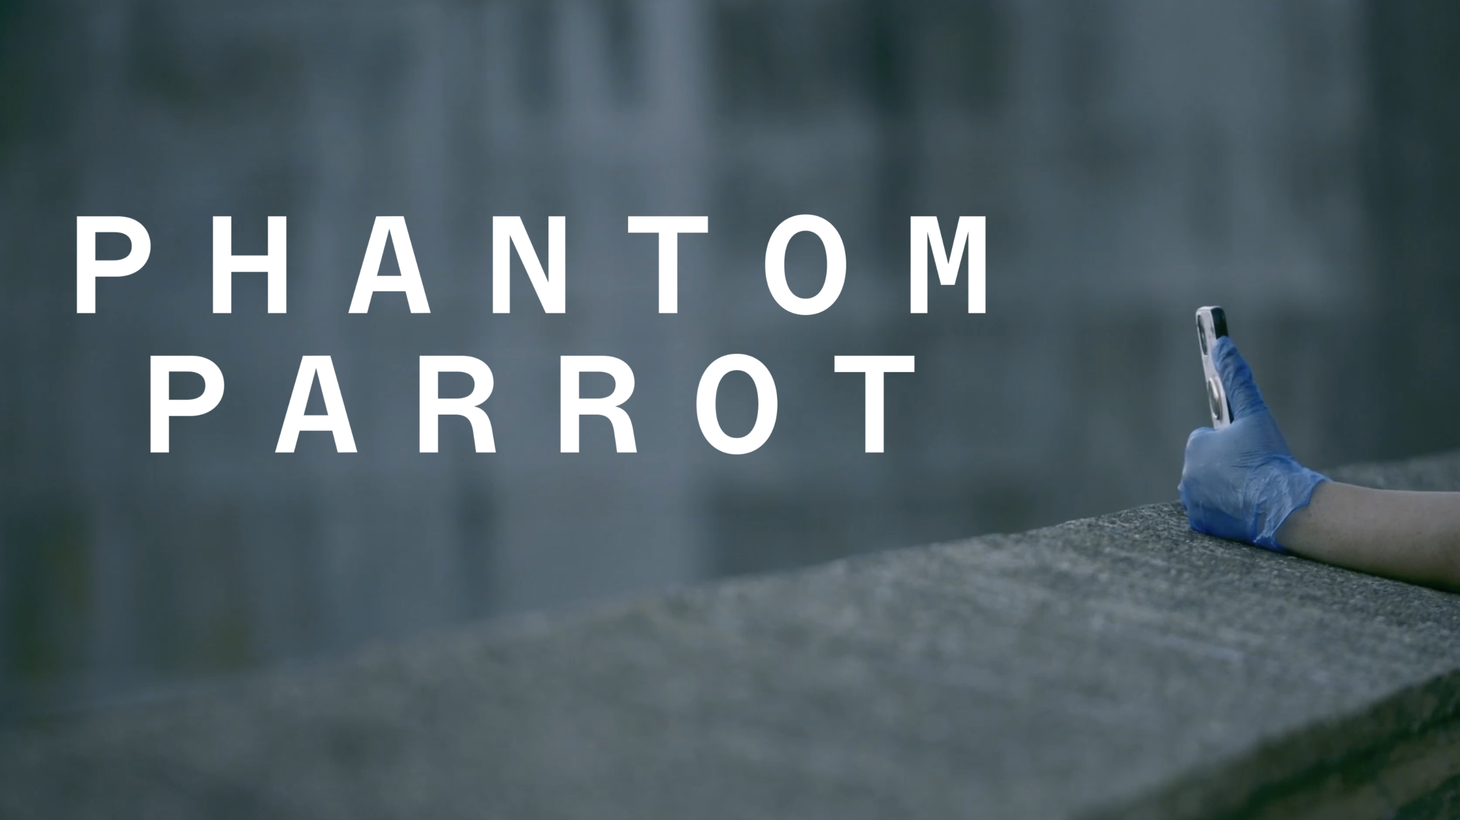 Phantom Parrot, a new documentary by director Kate Stonehill.